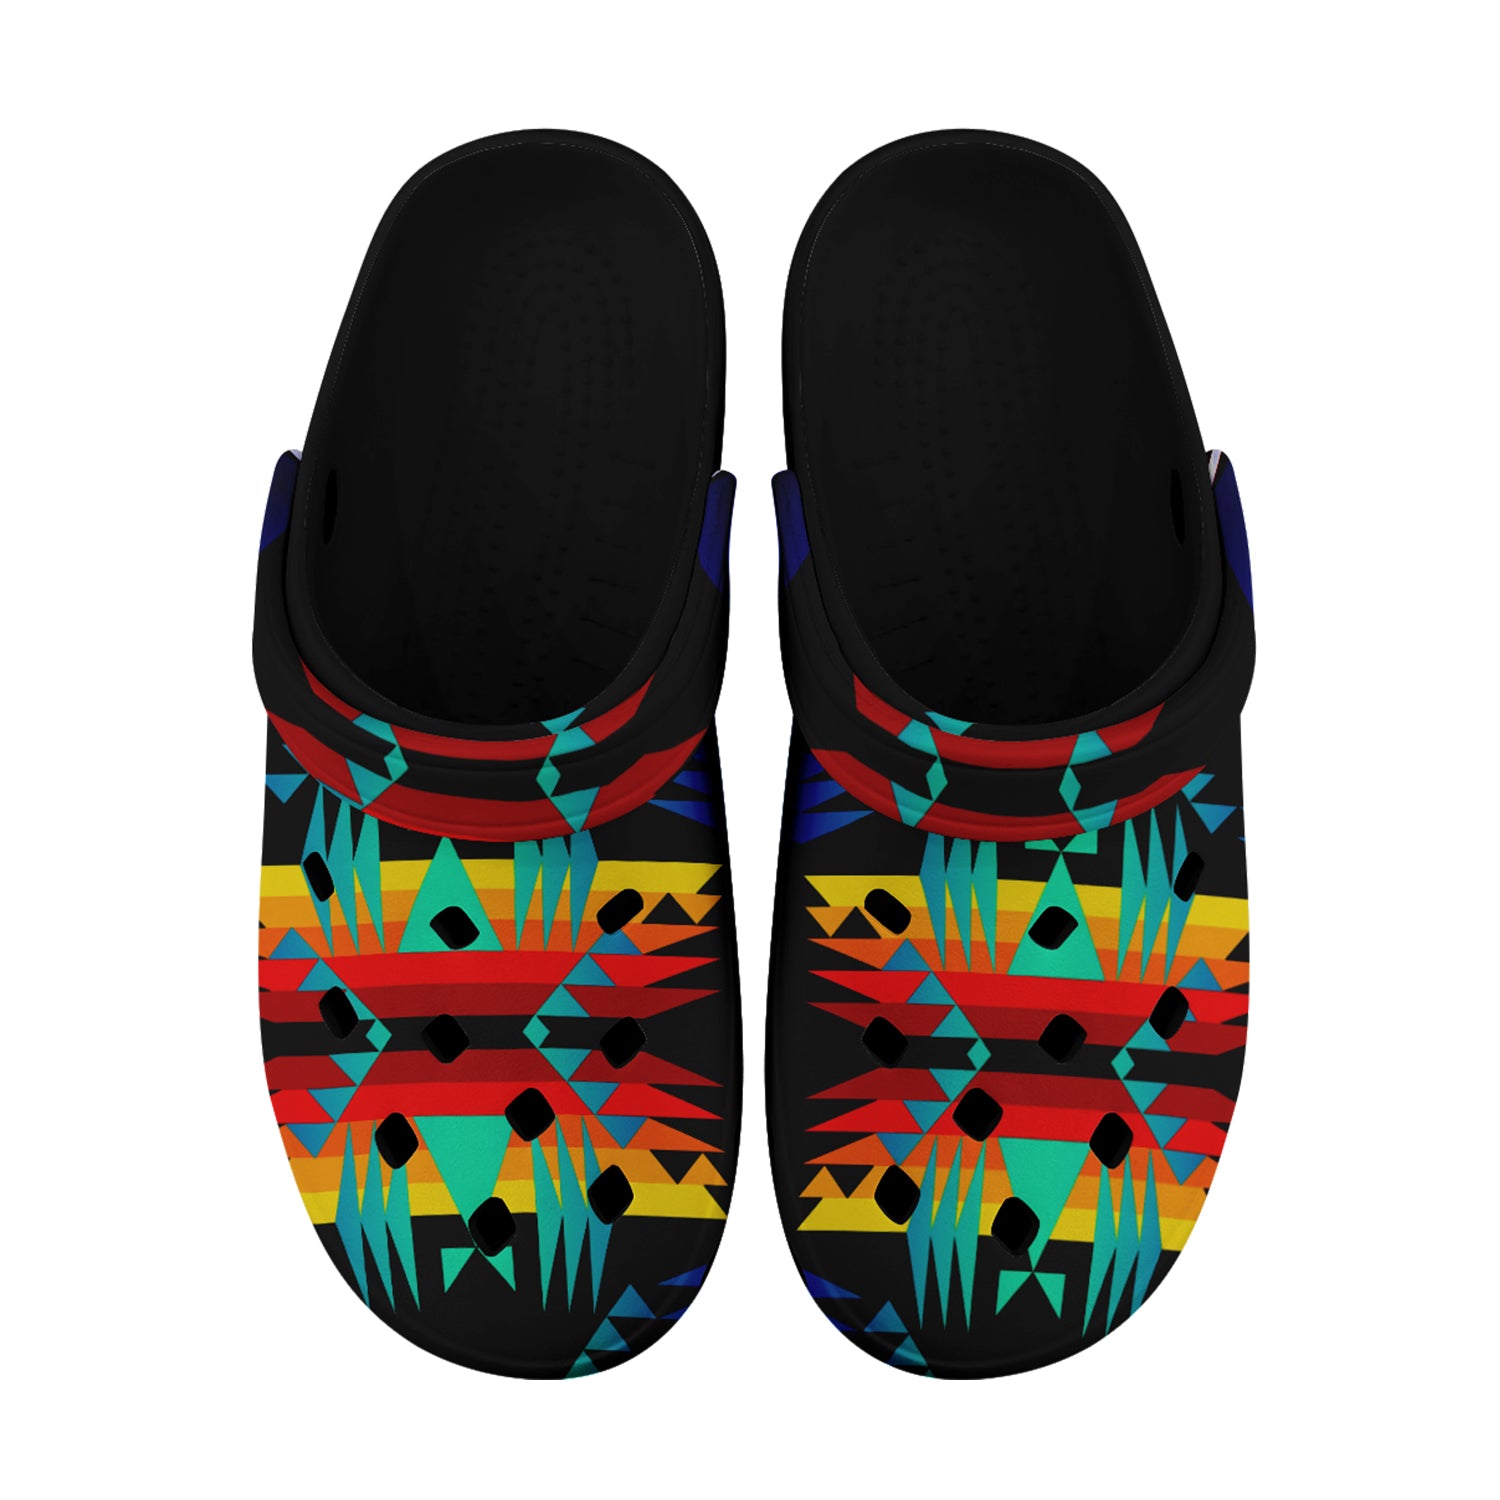 Between the Mountains Black Muddies Unisex Clog Shoes